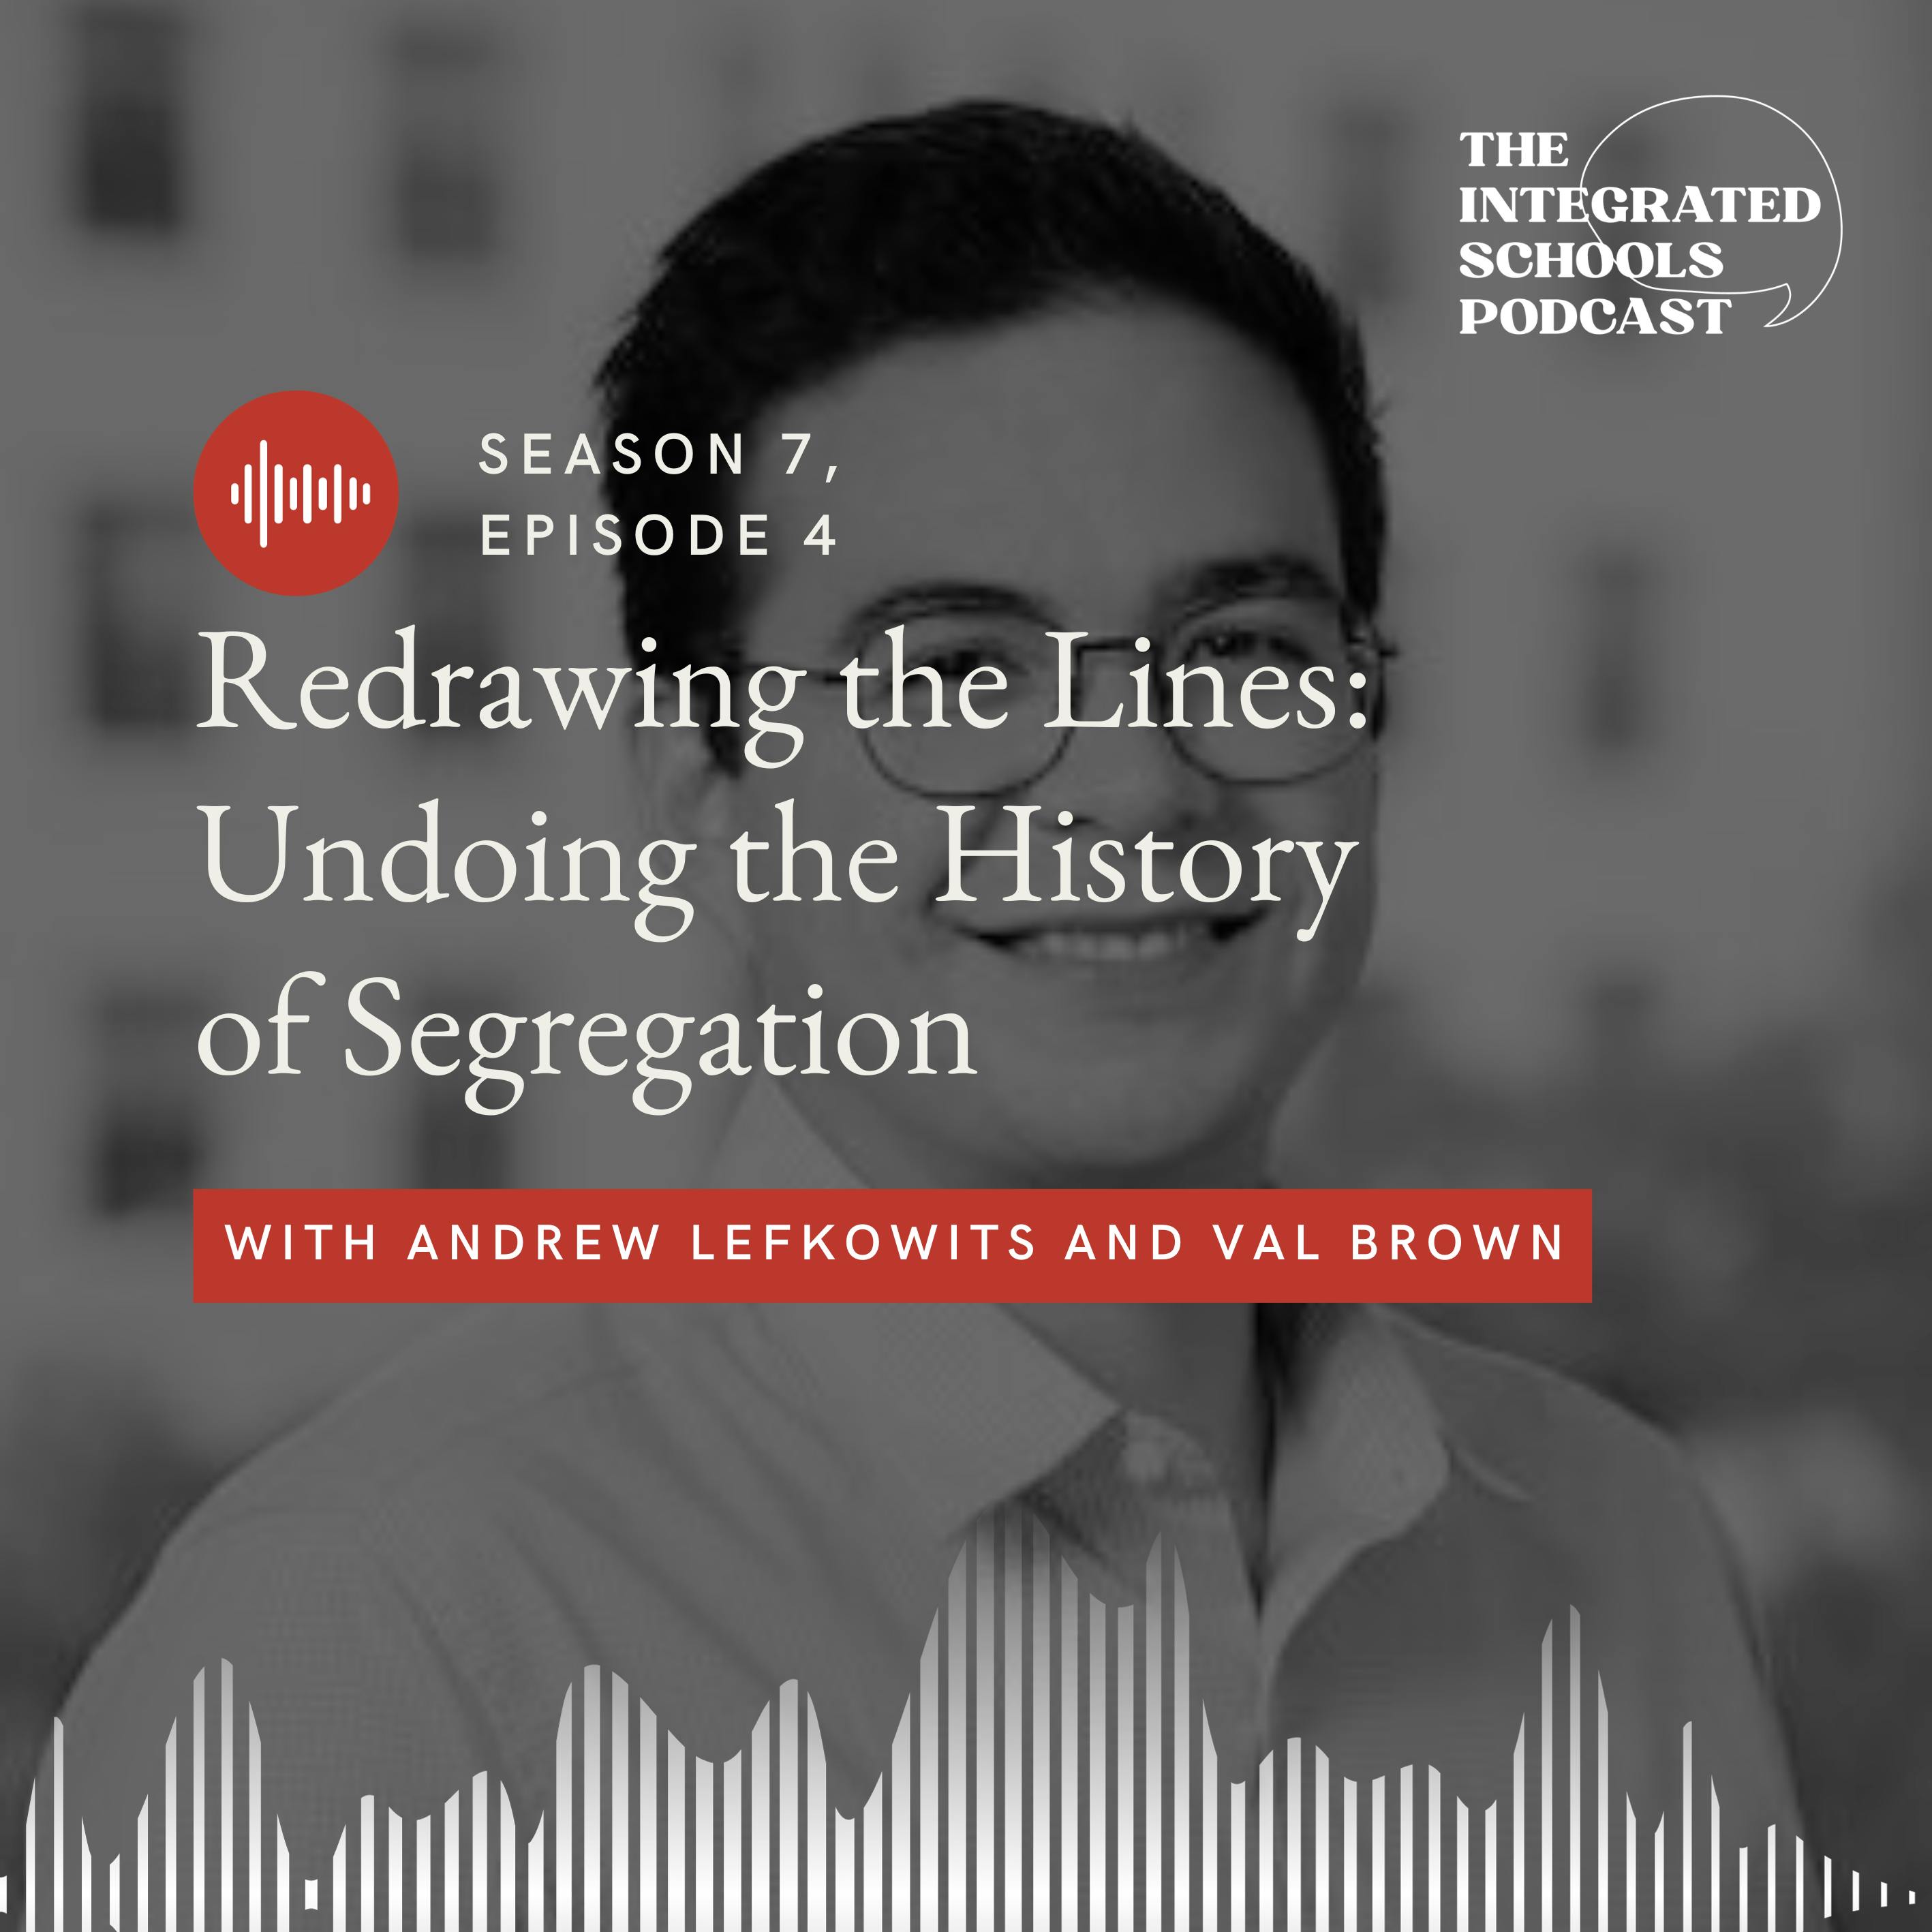 Redrawing the Lines: Undoing the History of Segregation